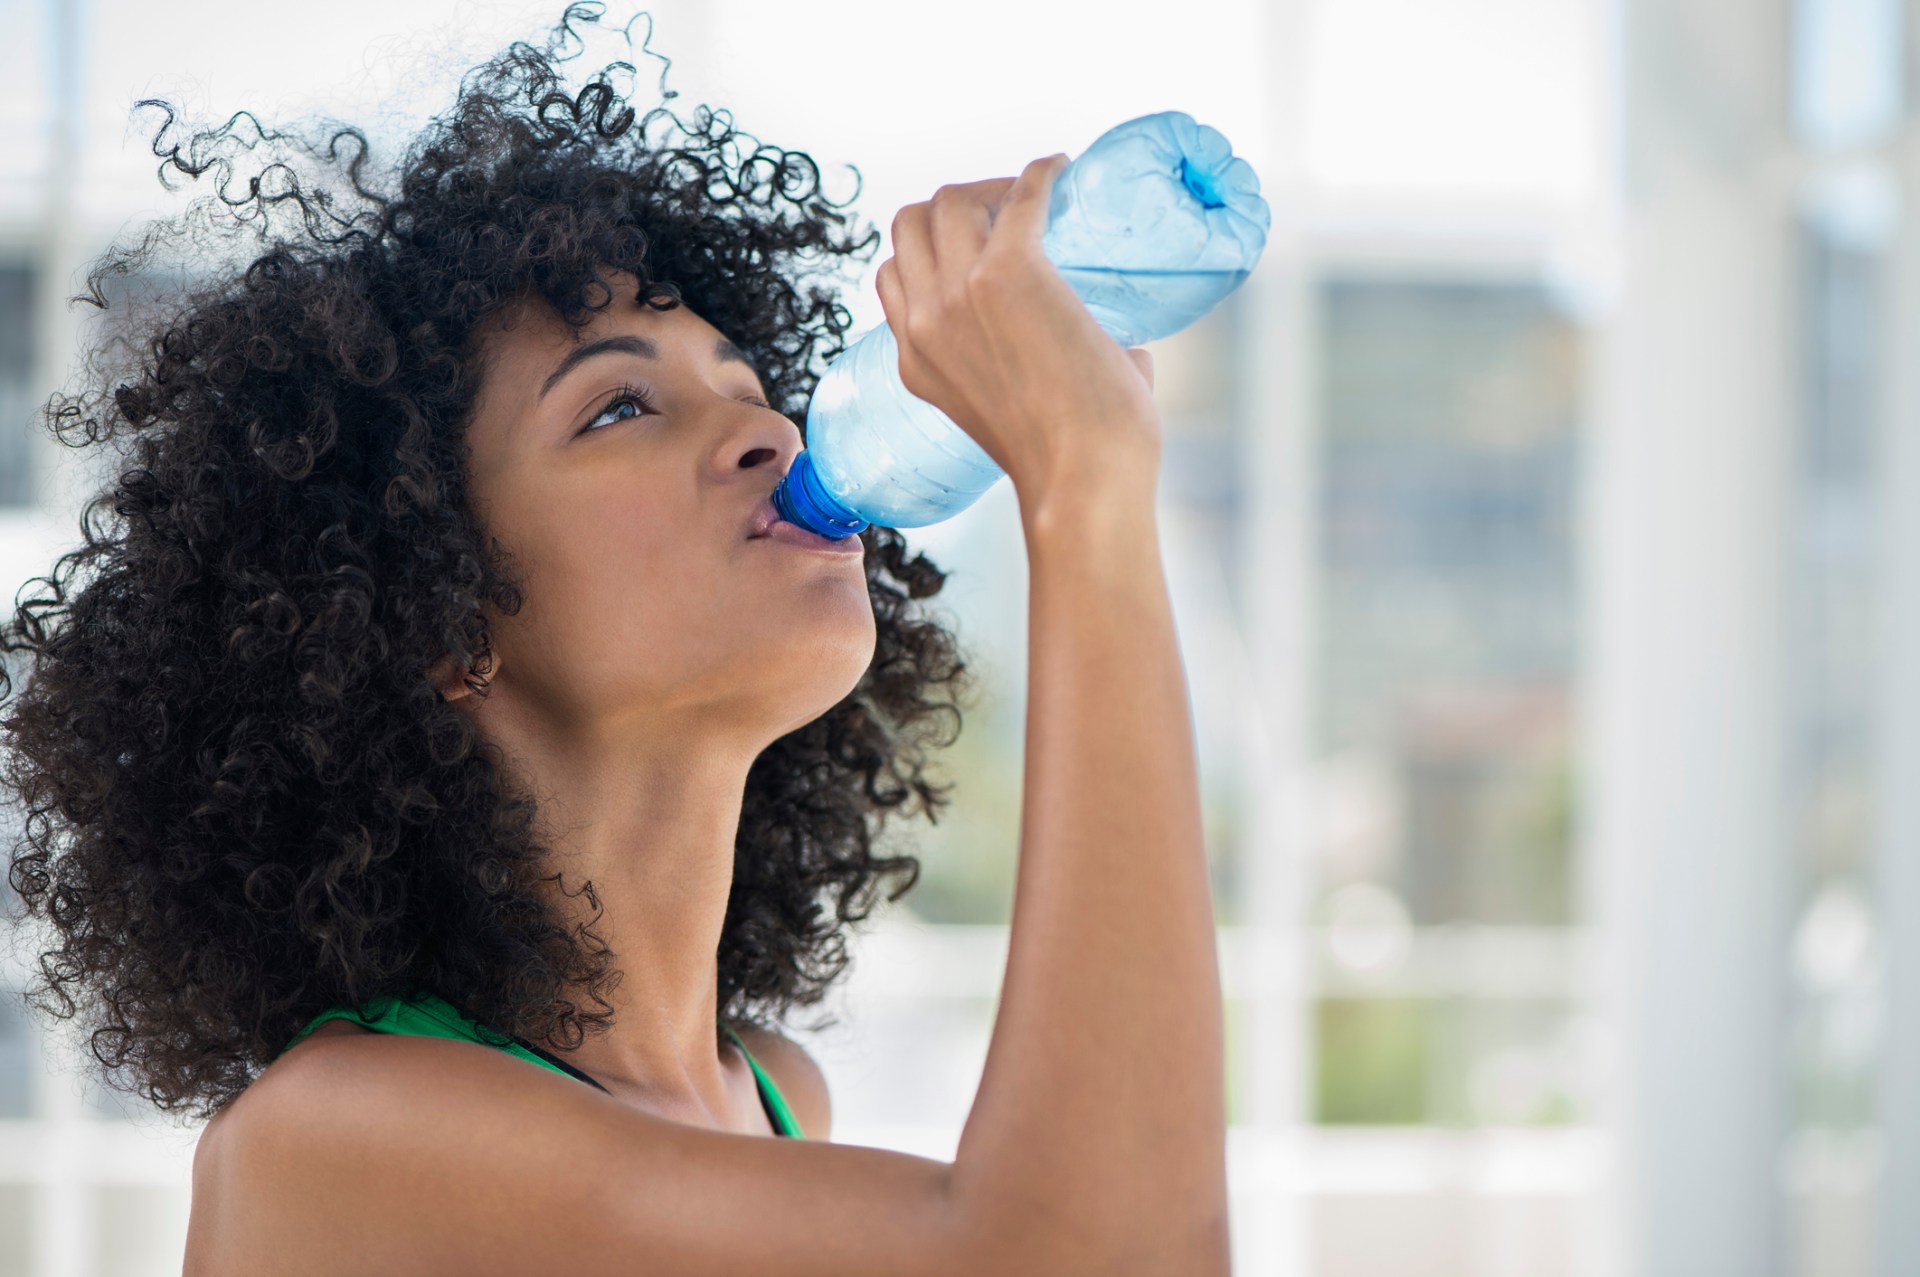 how many litres of water should you drink a day and does tea count?